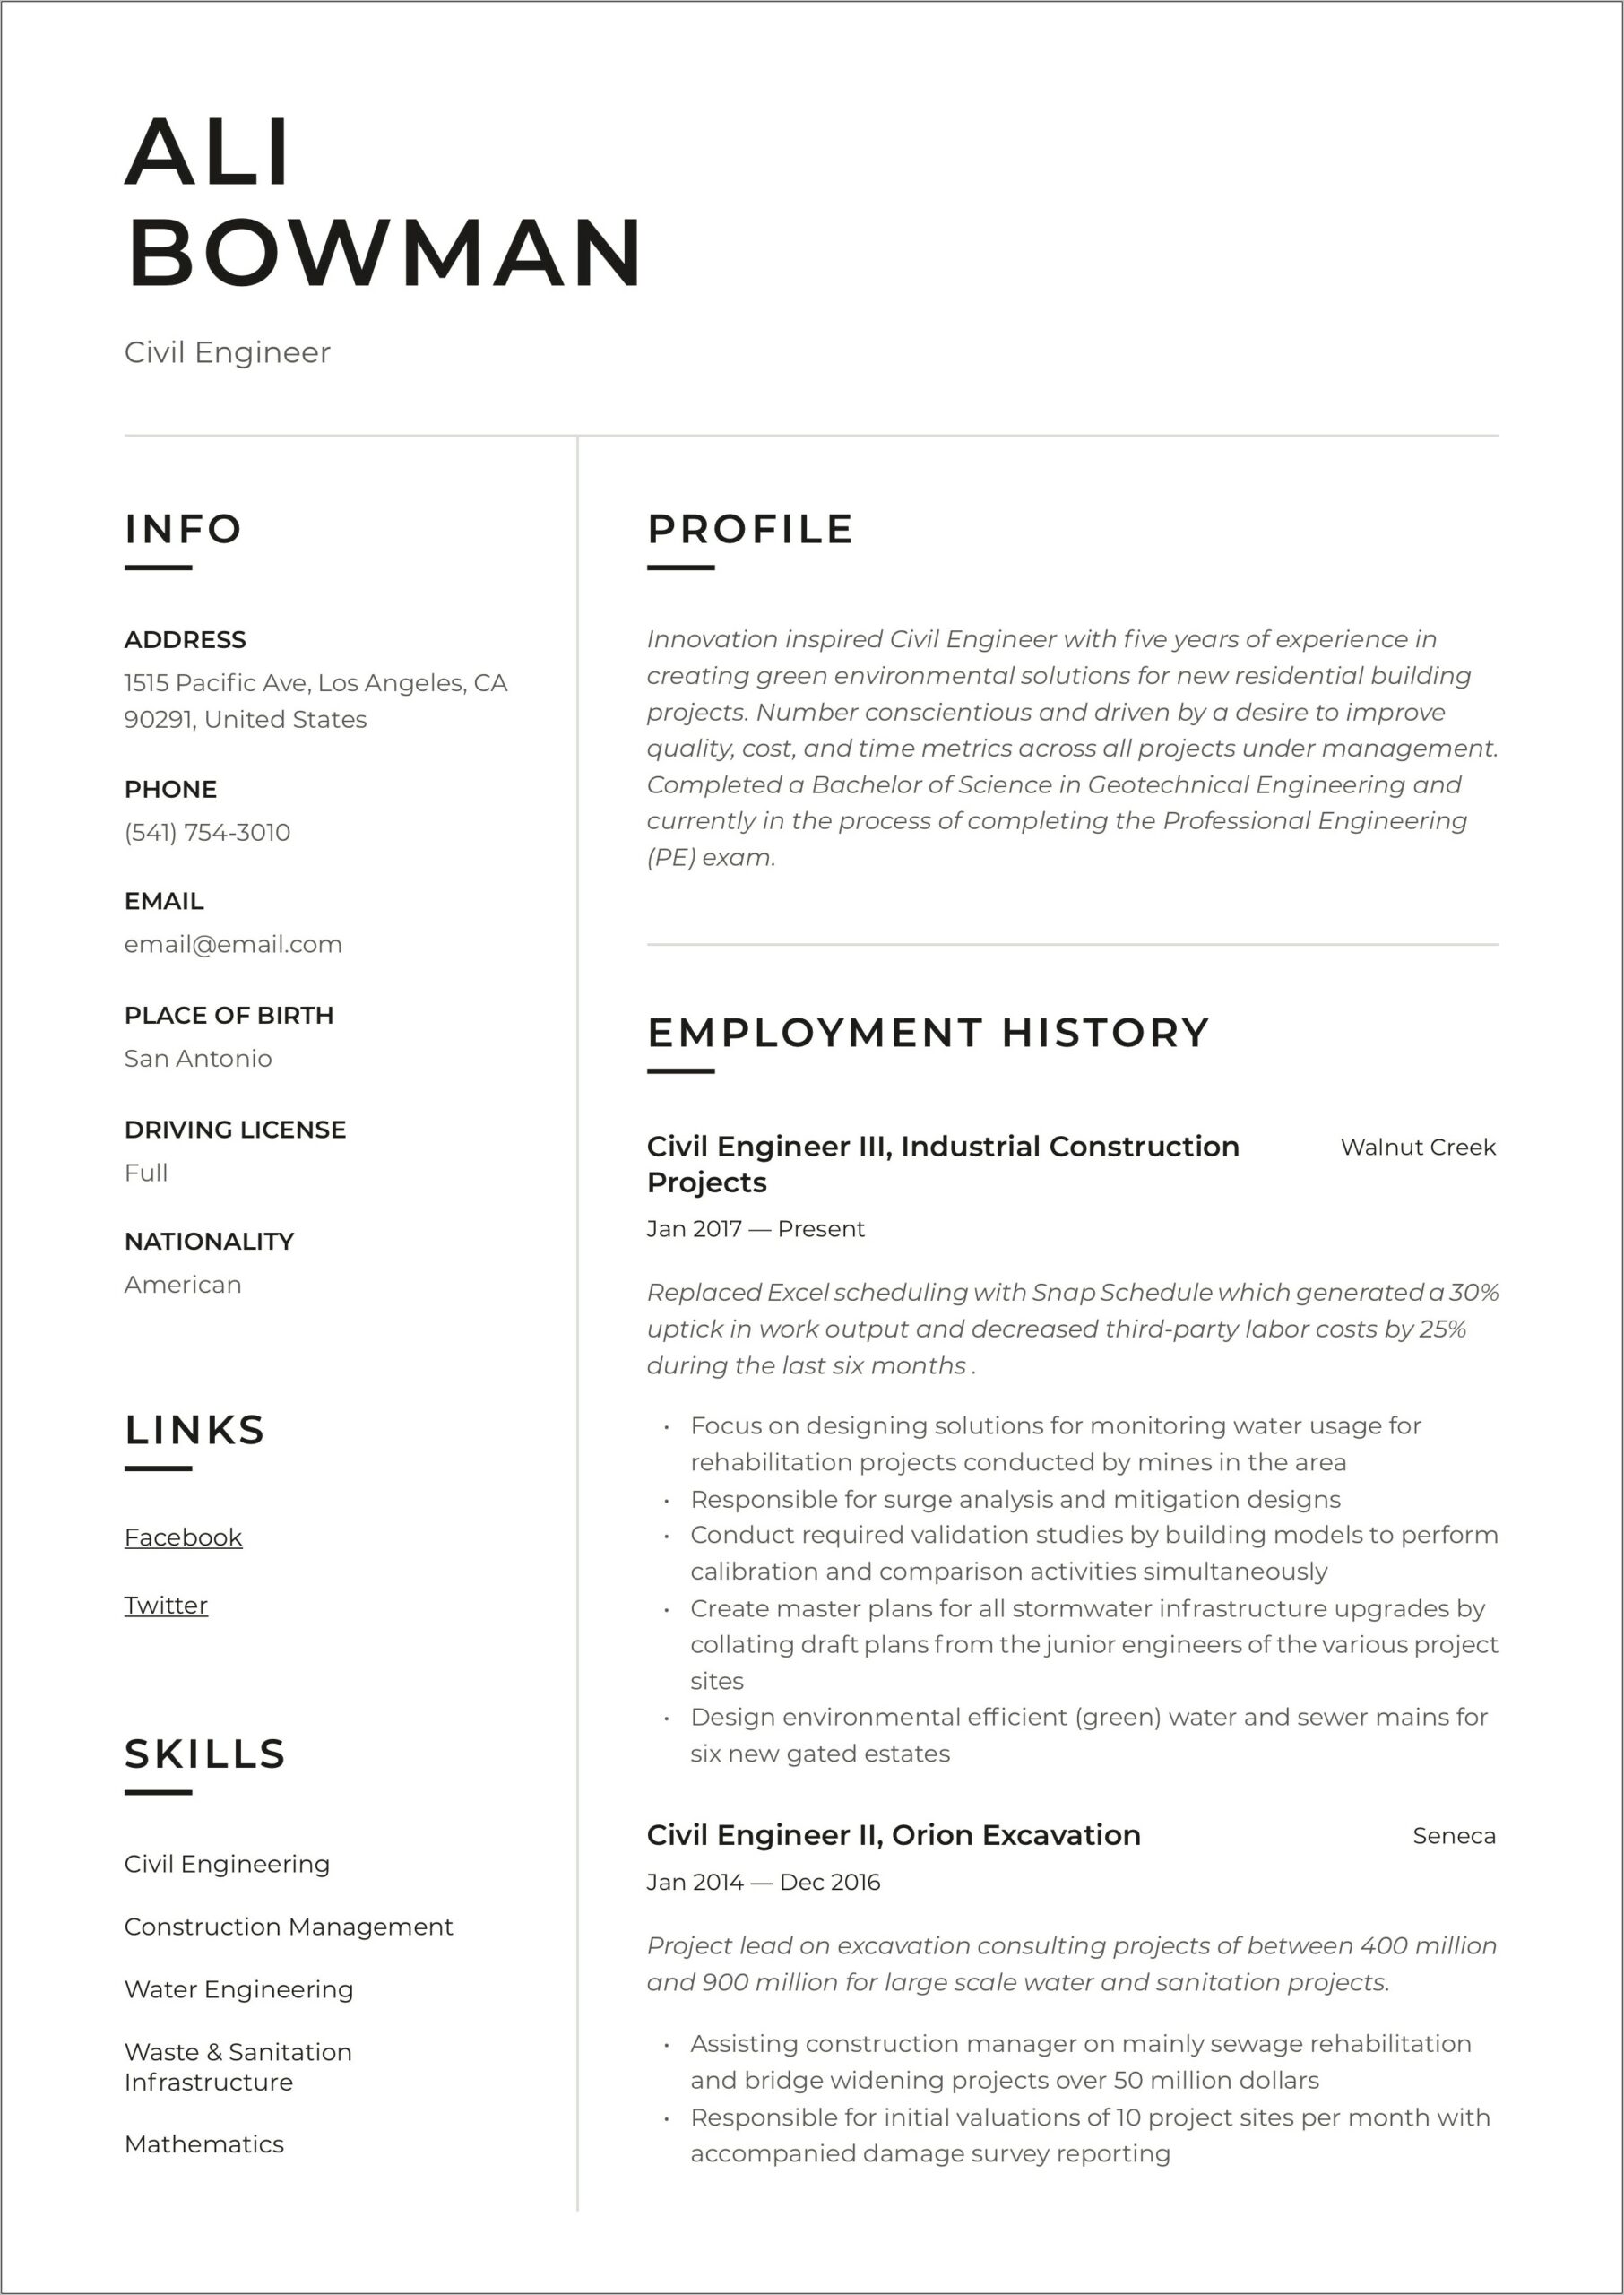 Resume Of A Civil Engineer Example